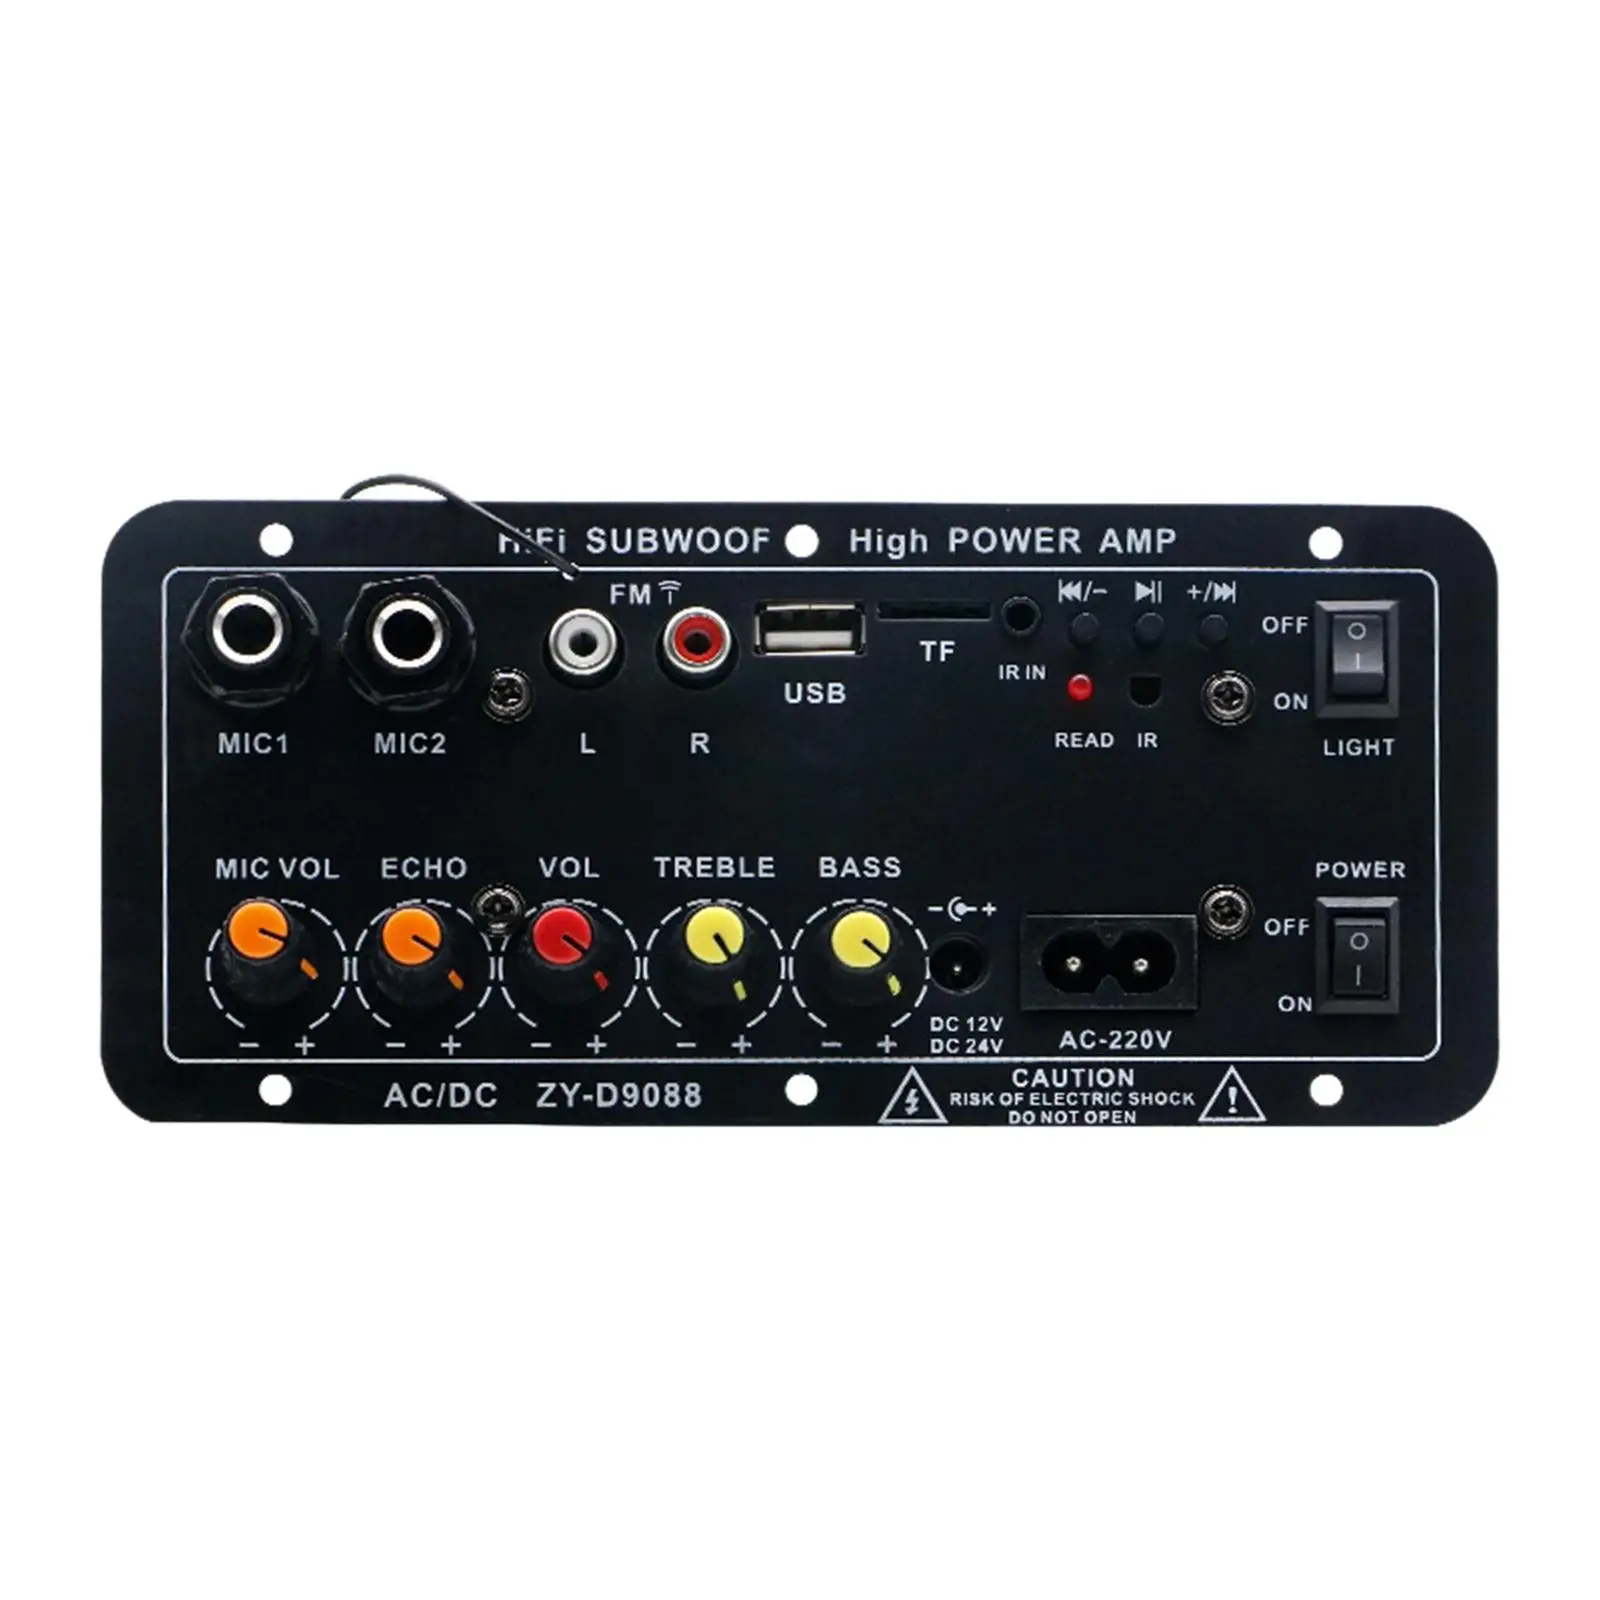 Amplifier Board with Remote Control High Power Stereo Subwoofer Amplifier for Home Store Theater Speakers US